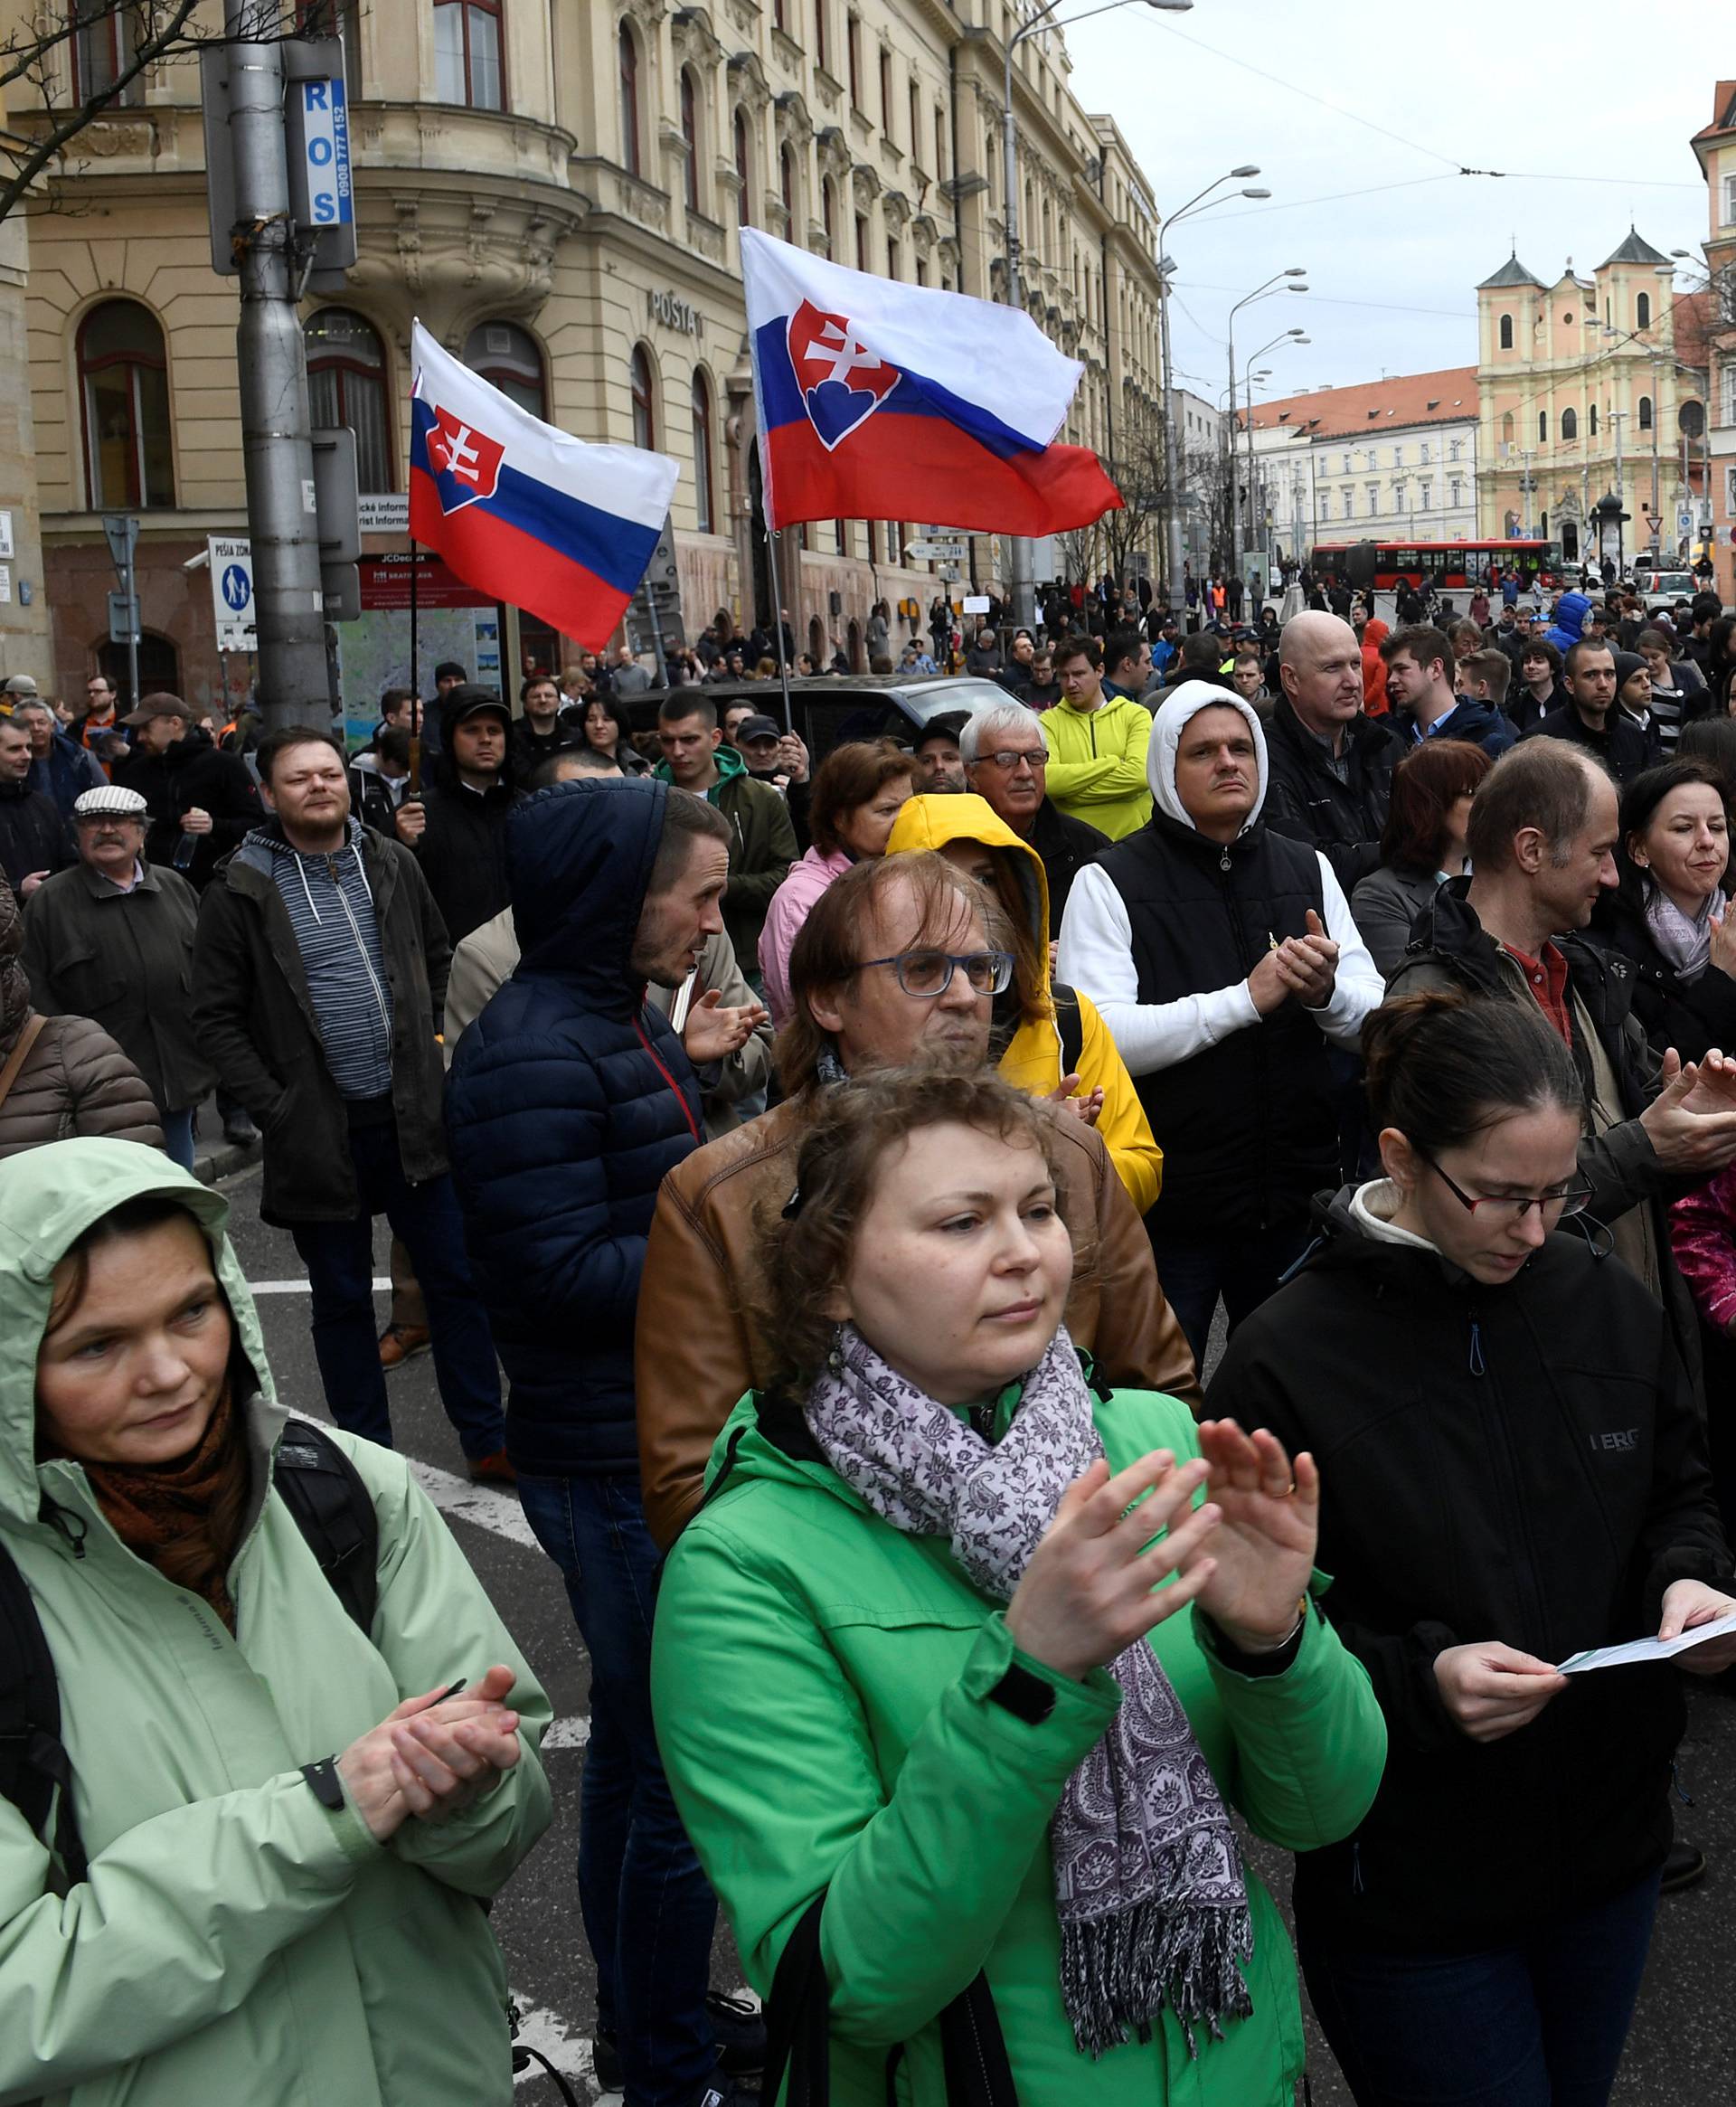 People attend a protest rally in reaction to the murder of Slovak investigative reporter Jan Kuciak and his fiancee Martina Kusnirova, in Bratislava